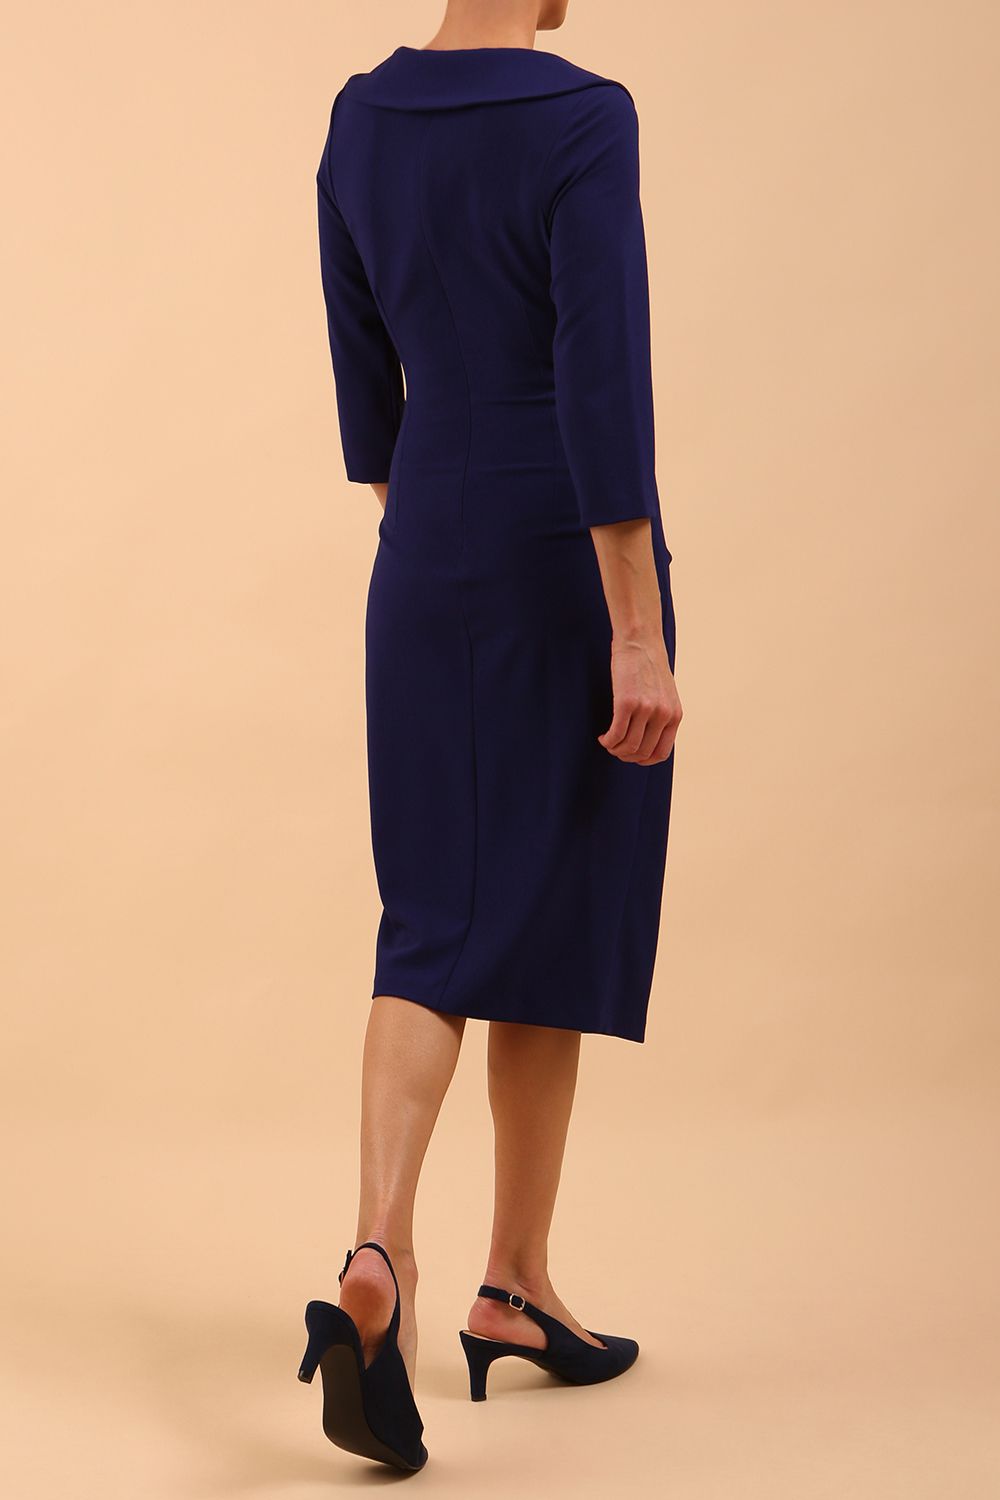  model is wearing diva catwalk liesel wrap pencil sleeved dress with collar half way around low v-neck in oxford blue back